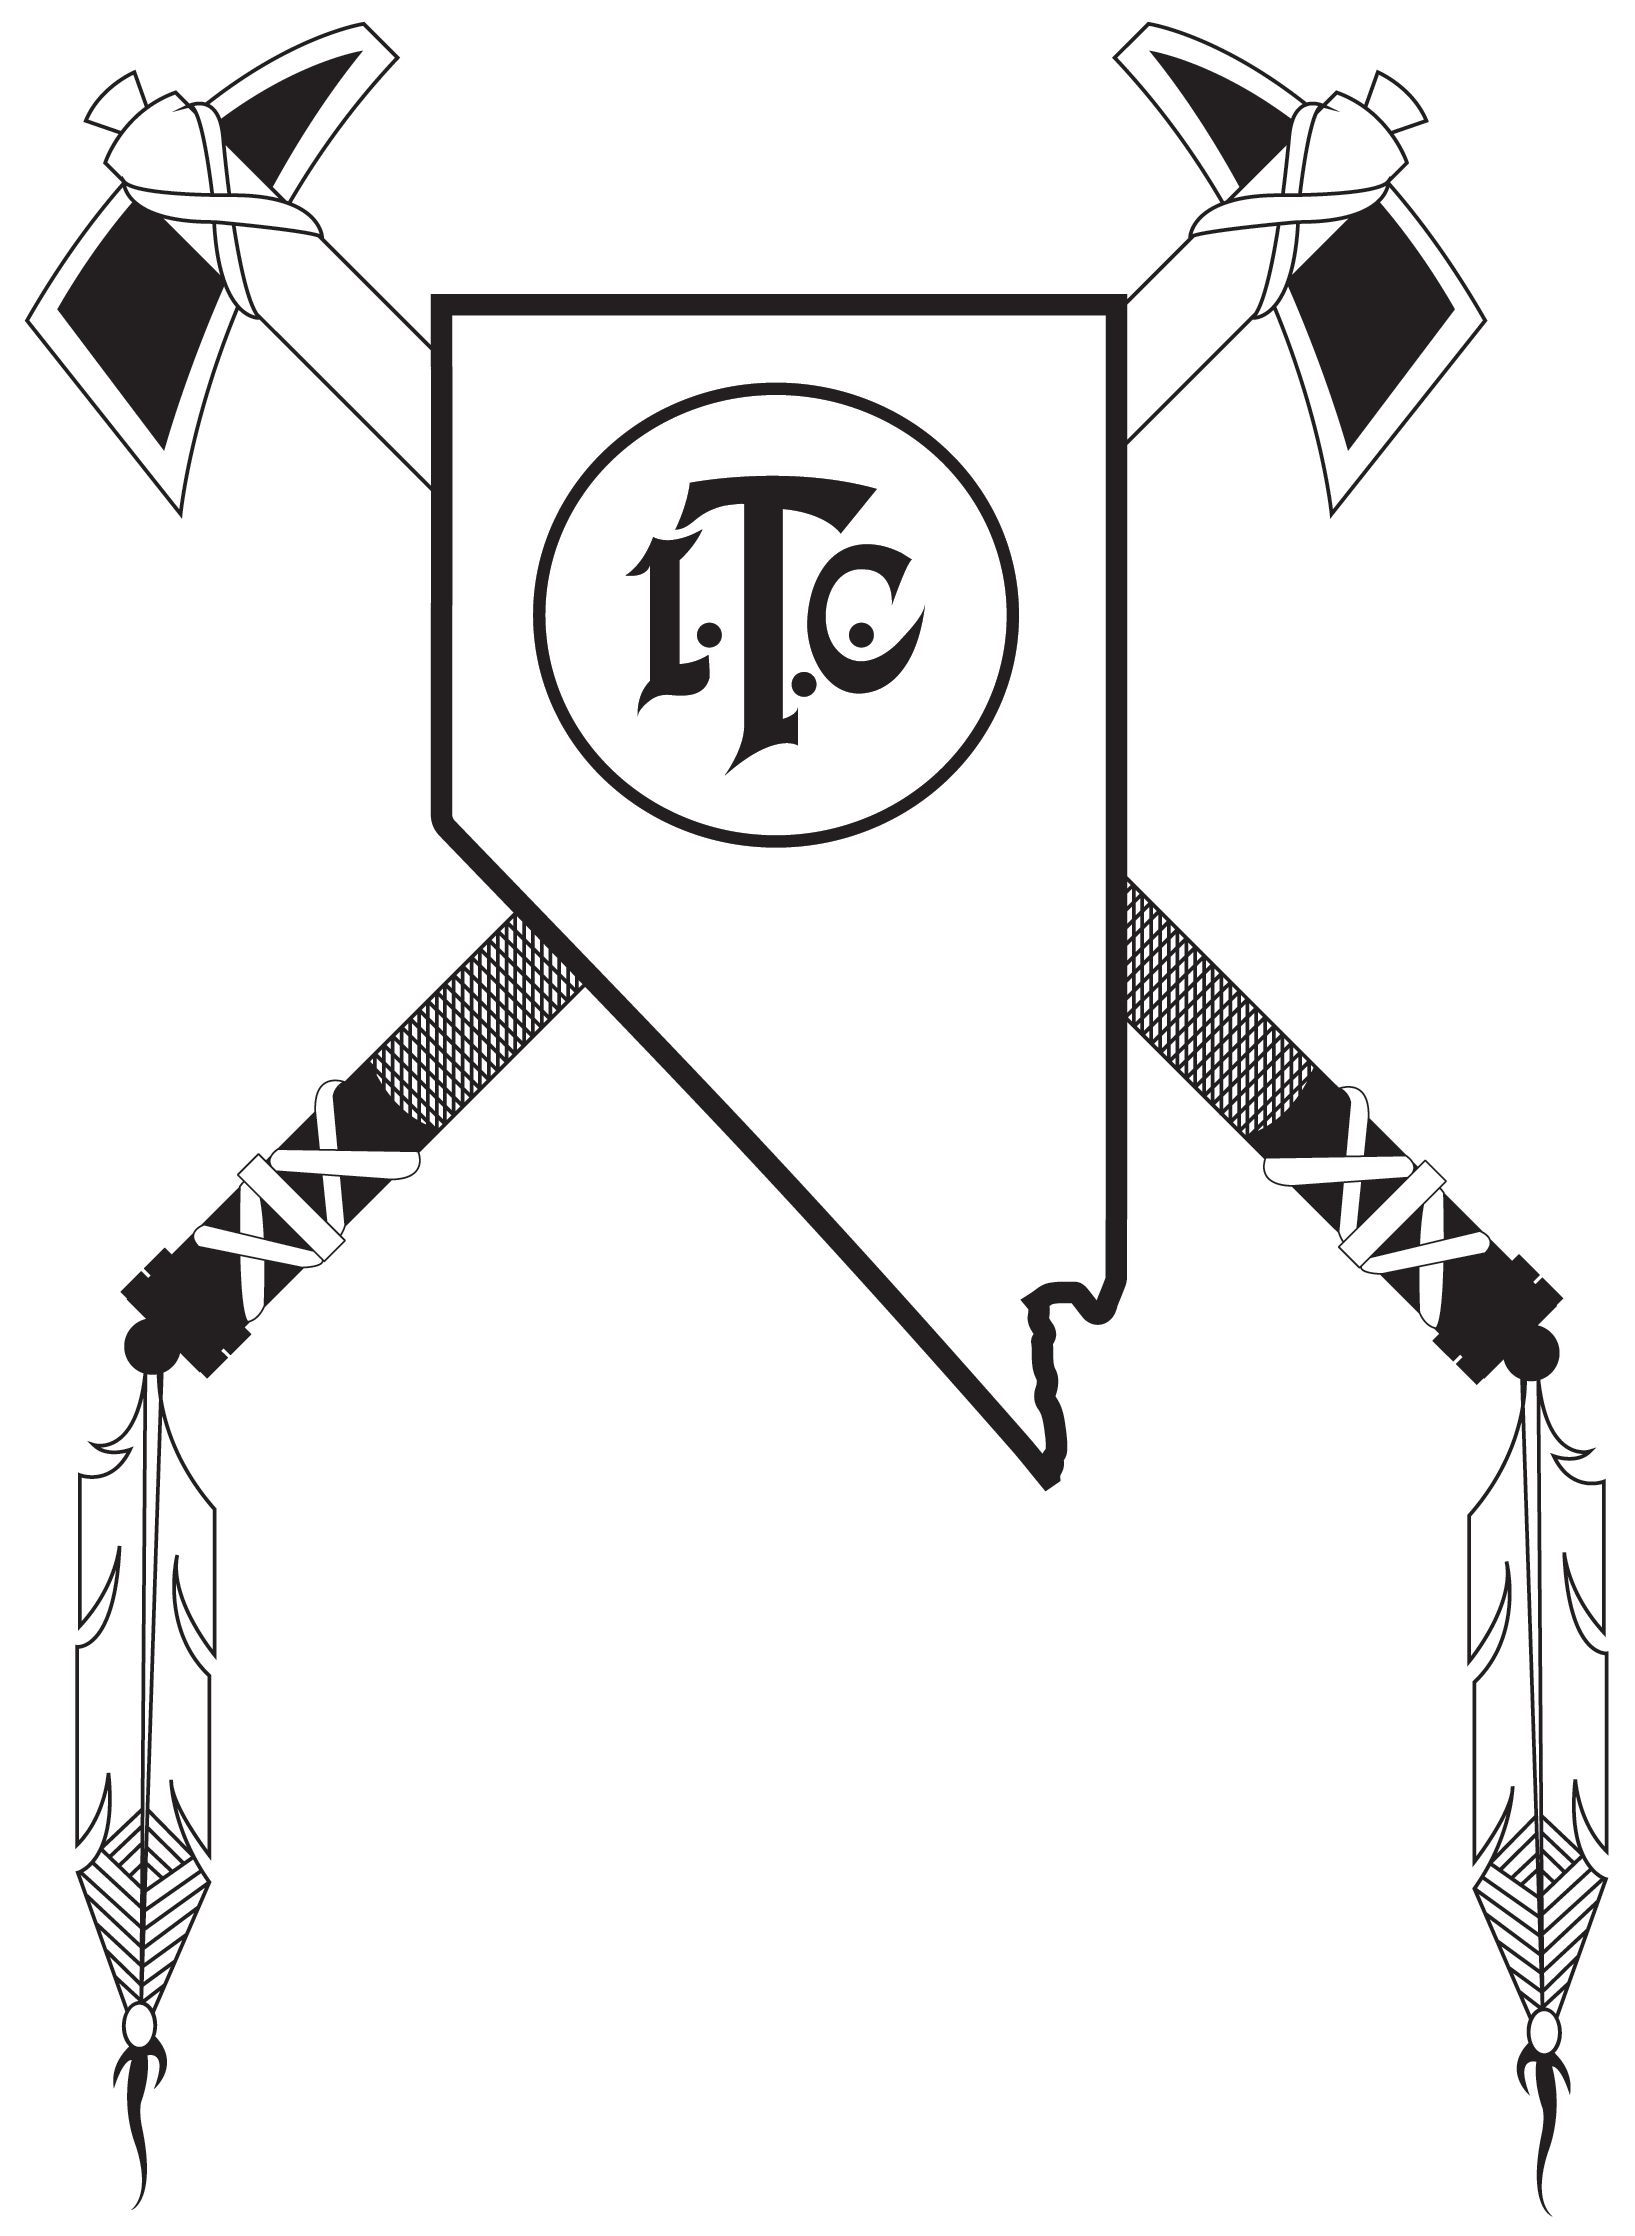 Inter-Tribal Council of Nevada